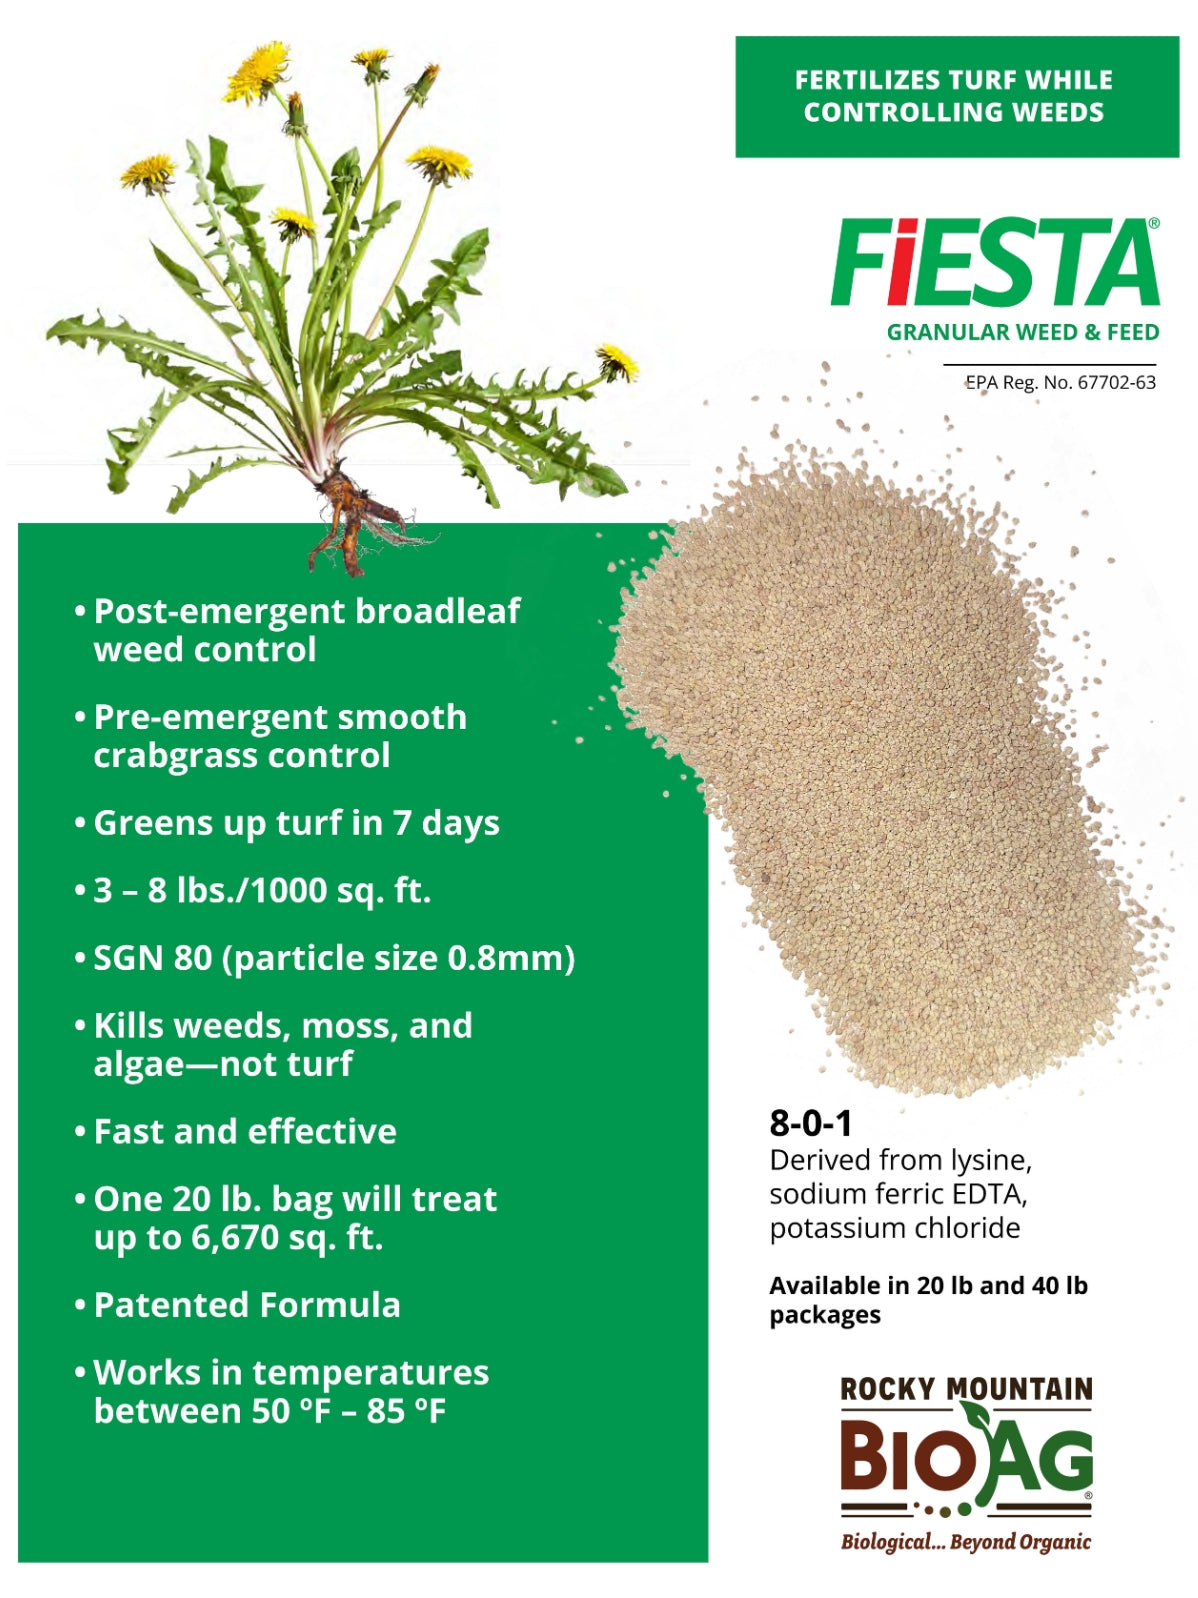 Fiesta Weed & Feed 8-0-1 Granular Fertilizer and Weed Control  Product Sheet